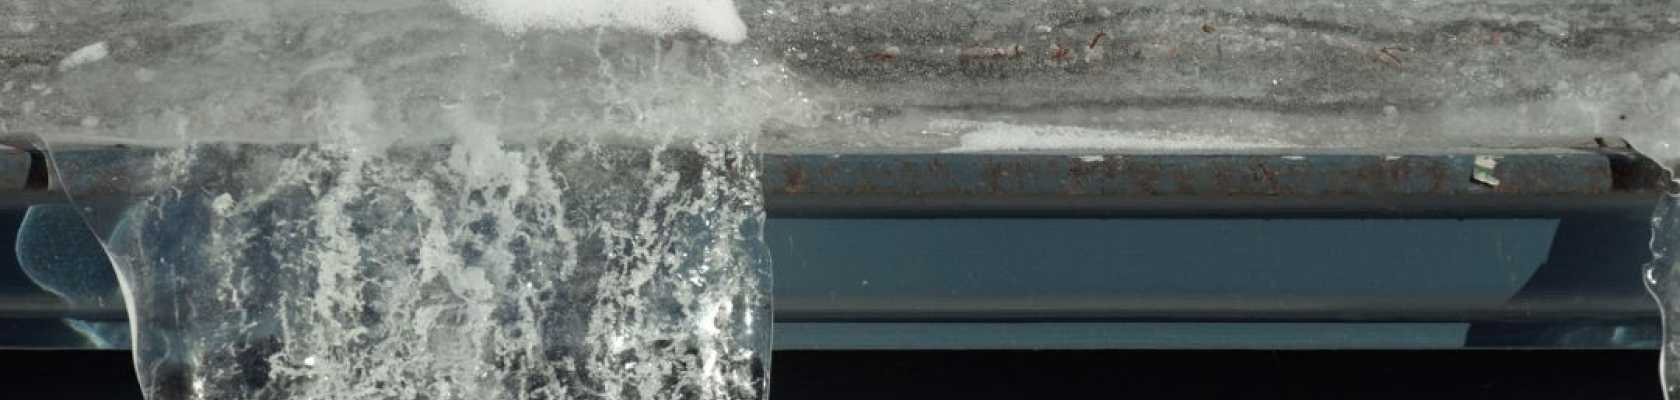 Image of a winter roofing issue and ice dam